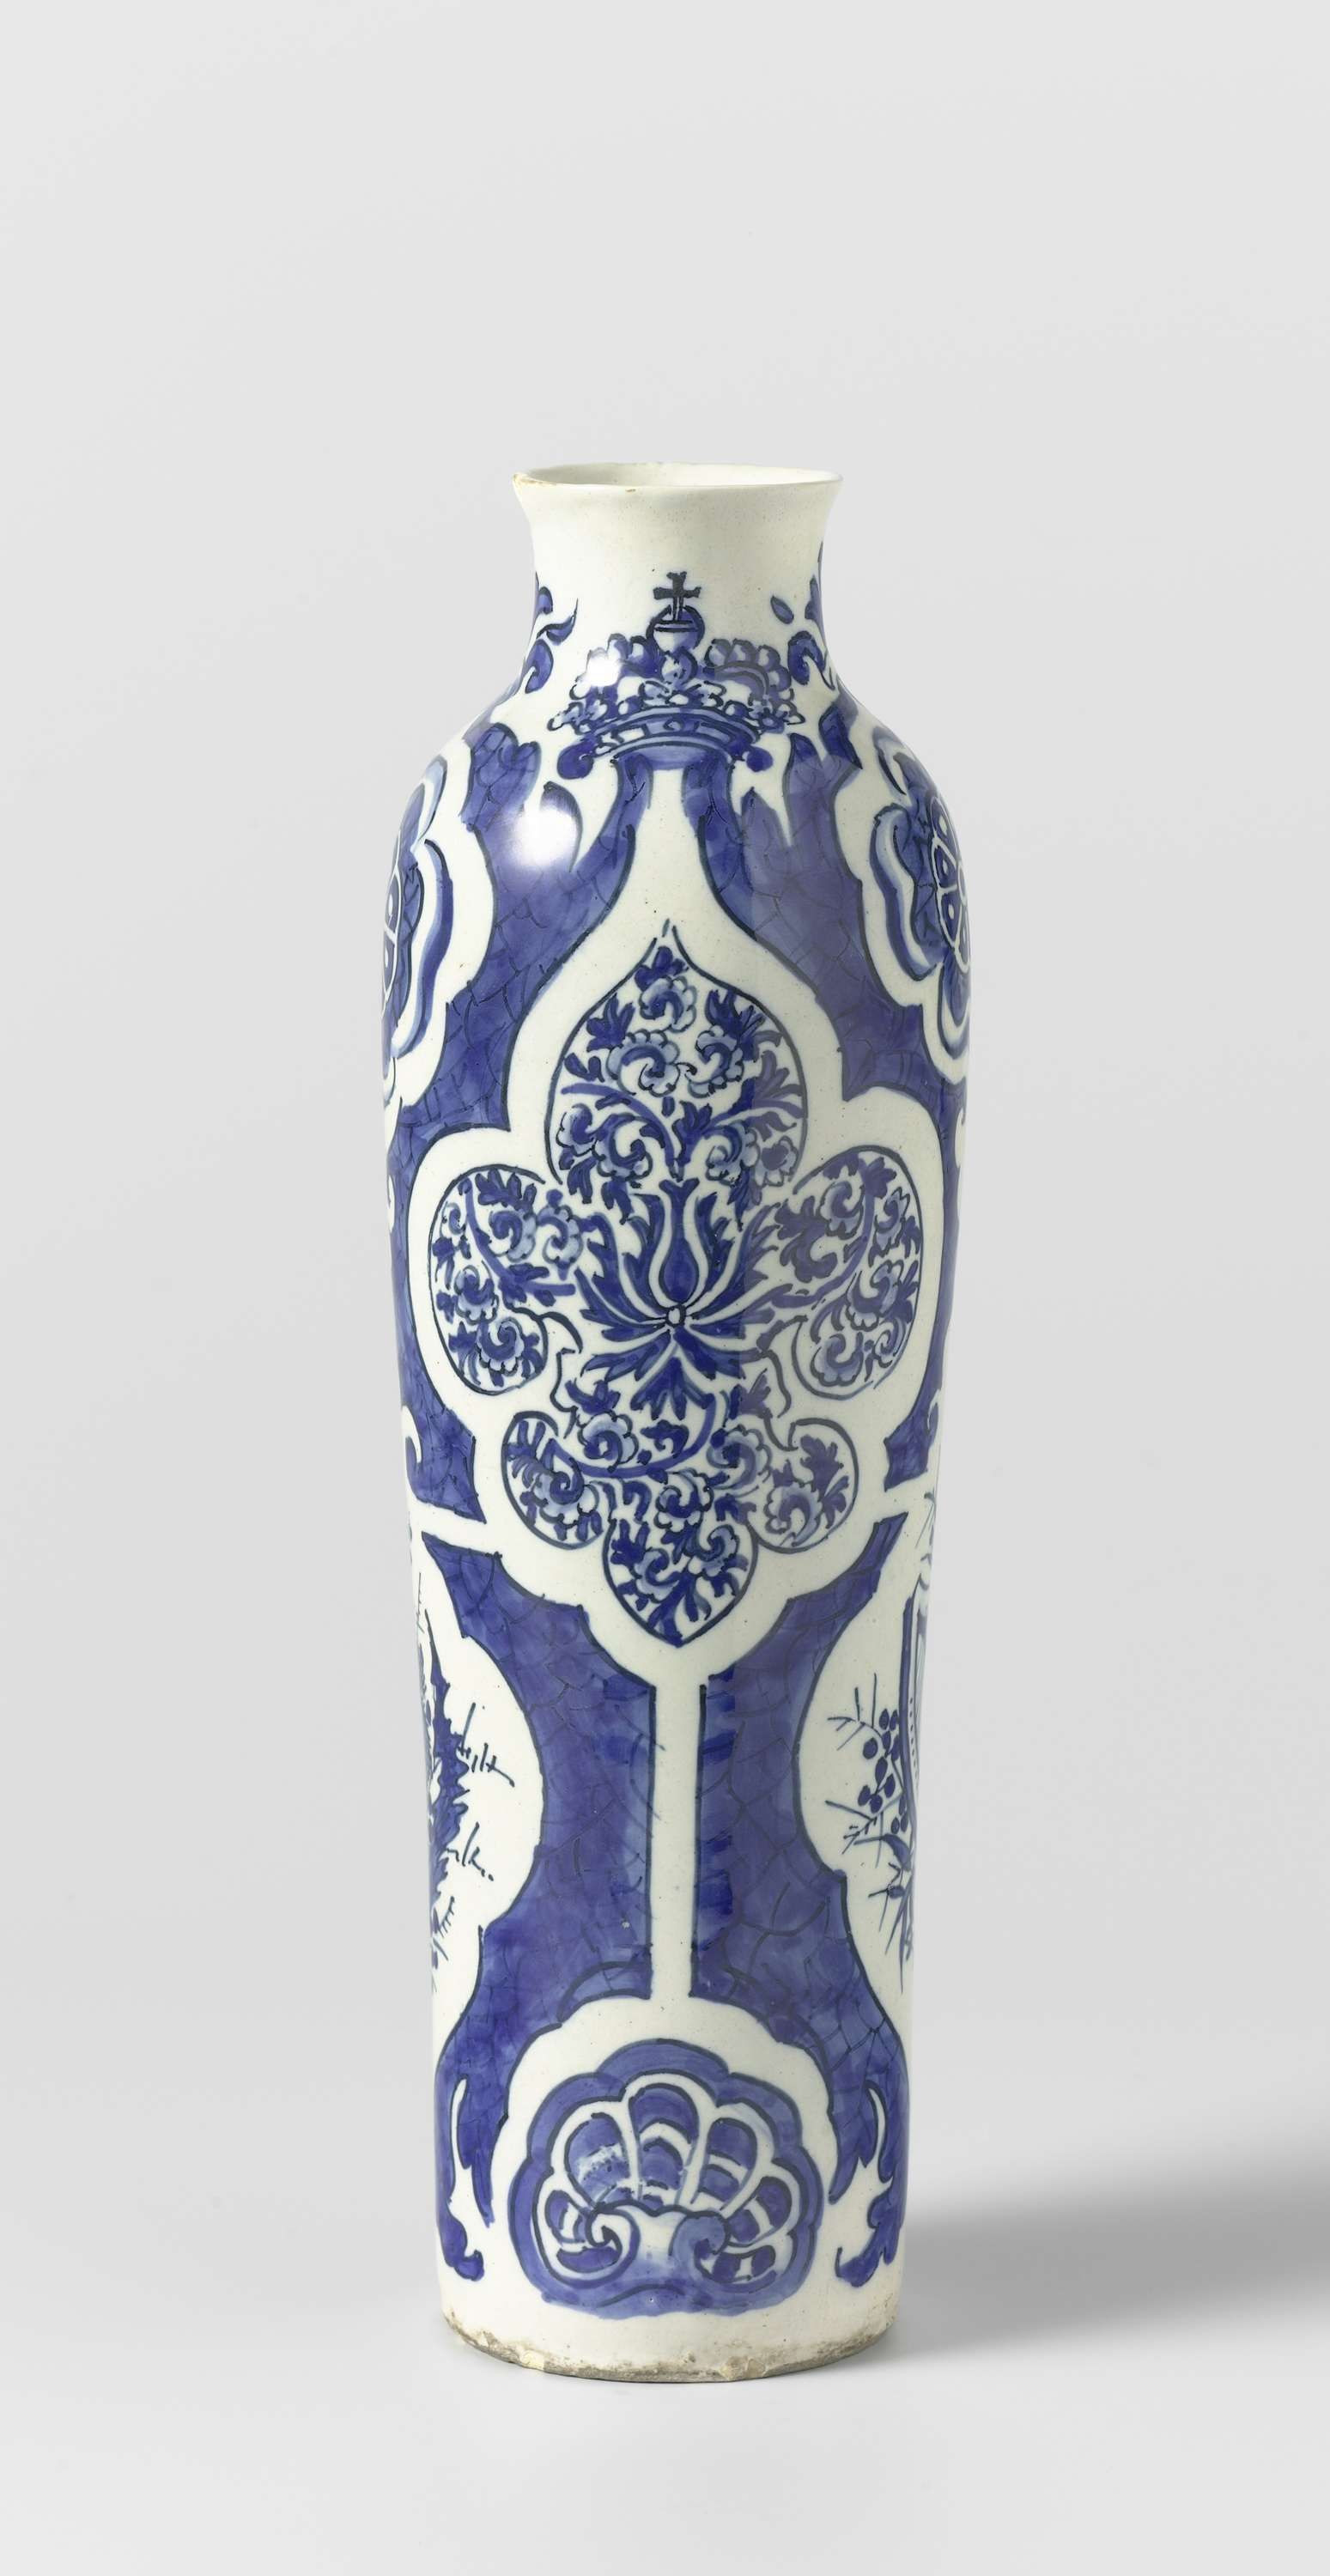 16 attractive Hand Painted Delft Holland Vase 2024 free download hand painted delft holland vase of faience vase decorated with tudor rose thistle and harp delft regarding faience vase decorated with tudor rose thistle and harp delft holland